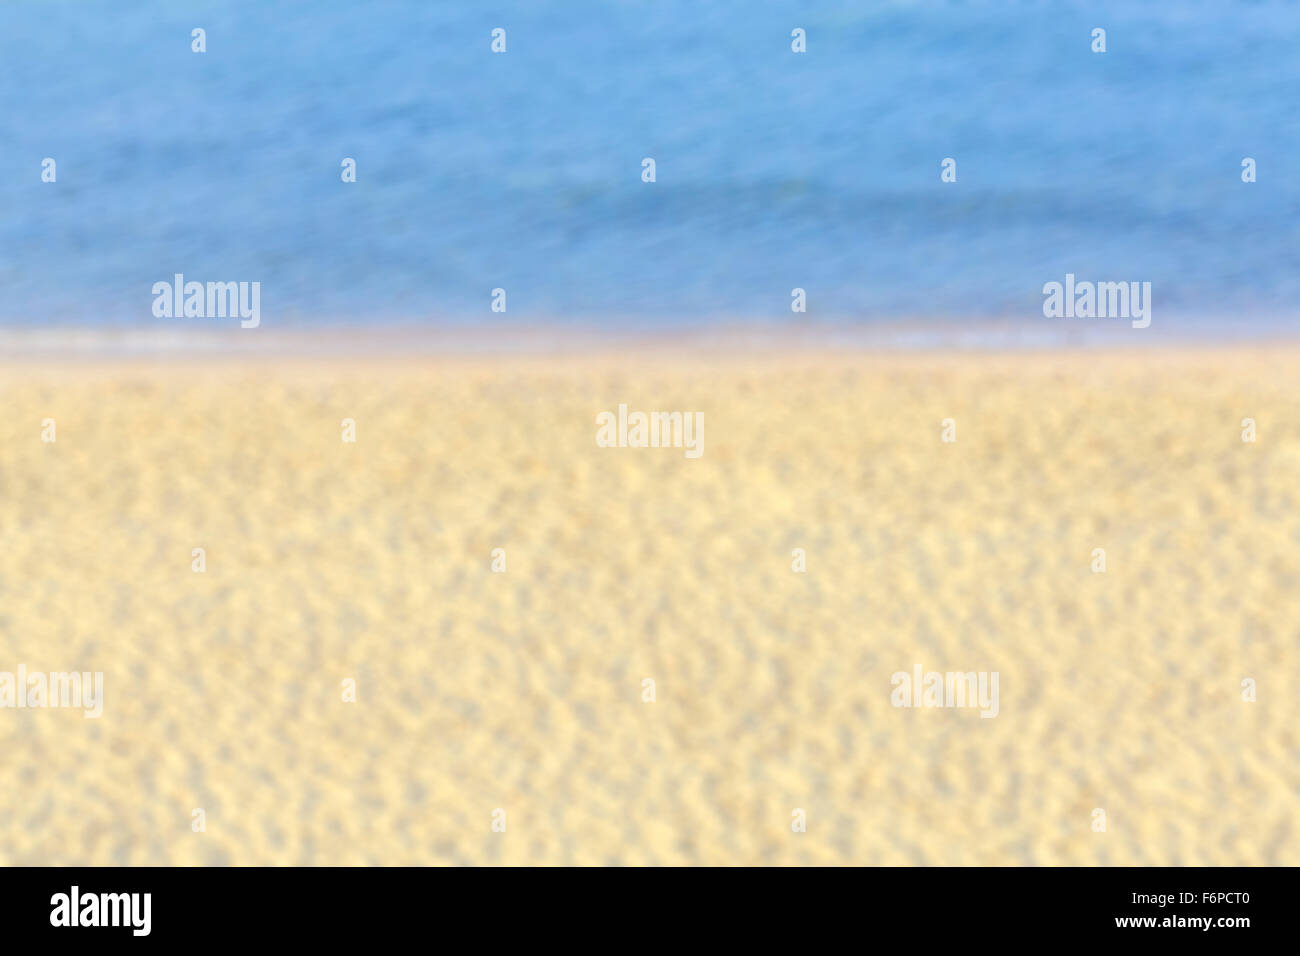 Blurred picture of a beach, abstract background or texture. Stock Photo